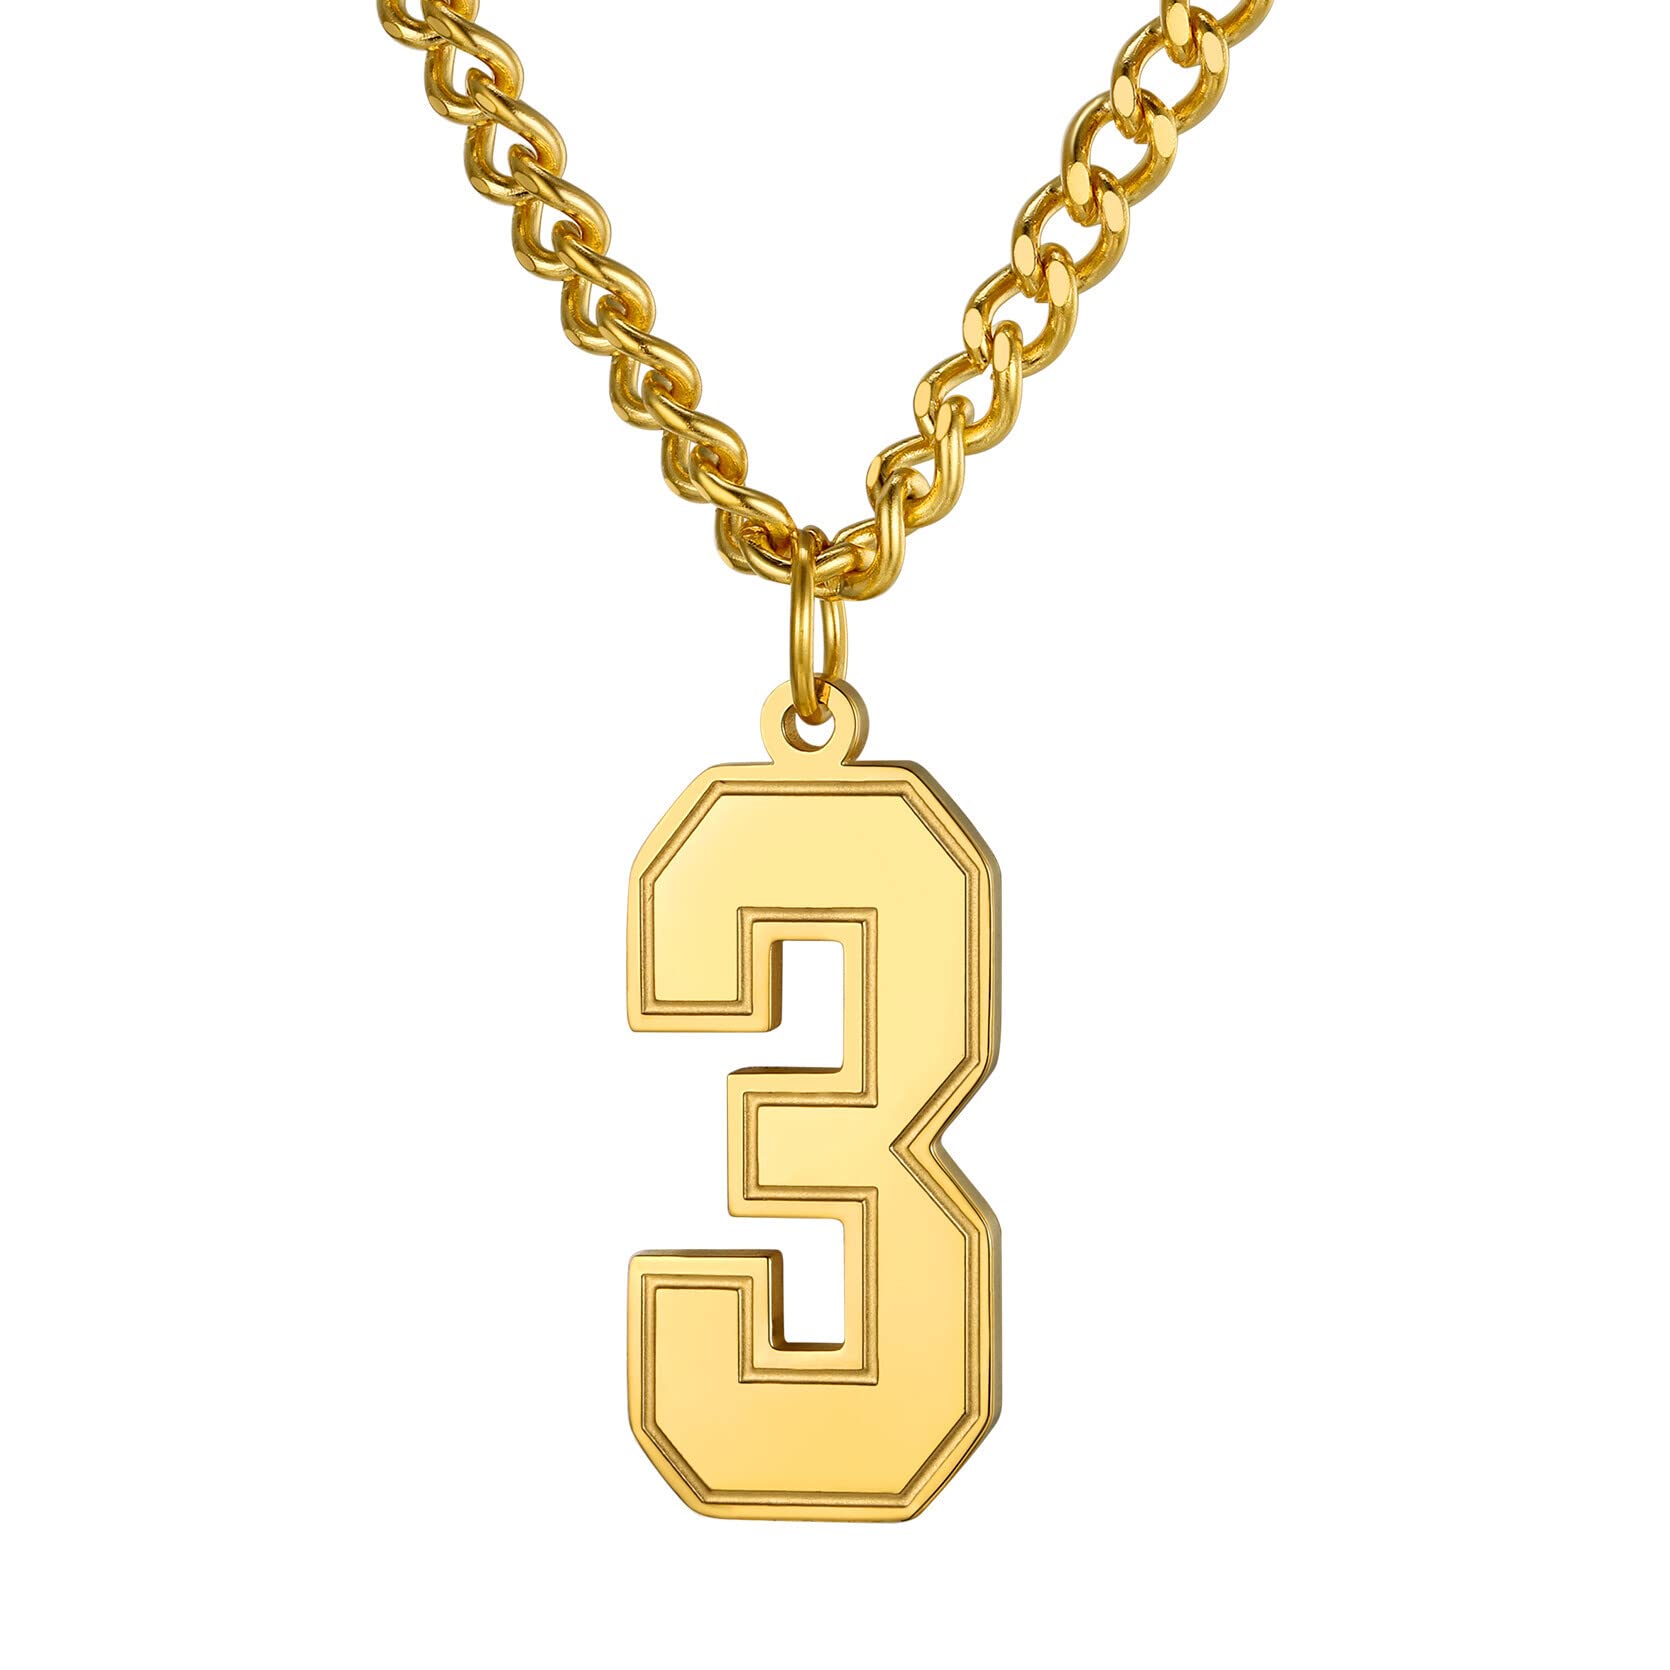 KeyStyle Number Necklace For Men Women, Custom Youth Baseball Necklaces with Numbers for Boys, Personalized Jersey Number Chain Sports Fans Pendant Soccer Football Basketball for Girls